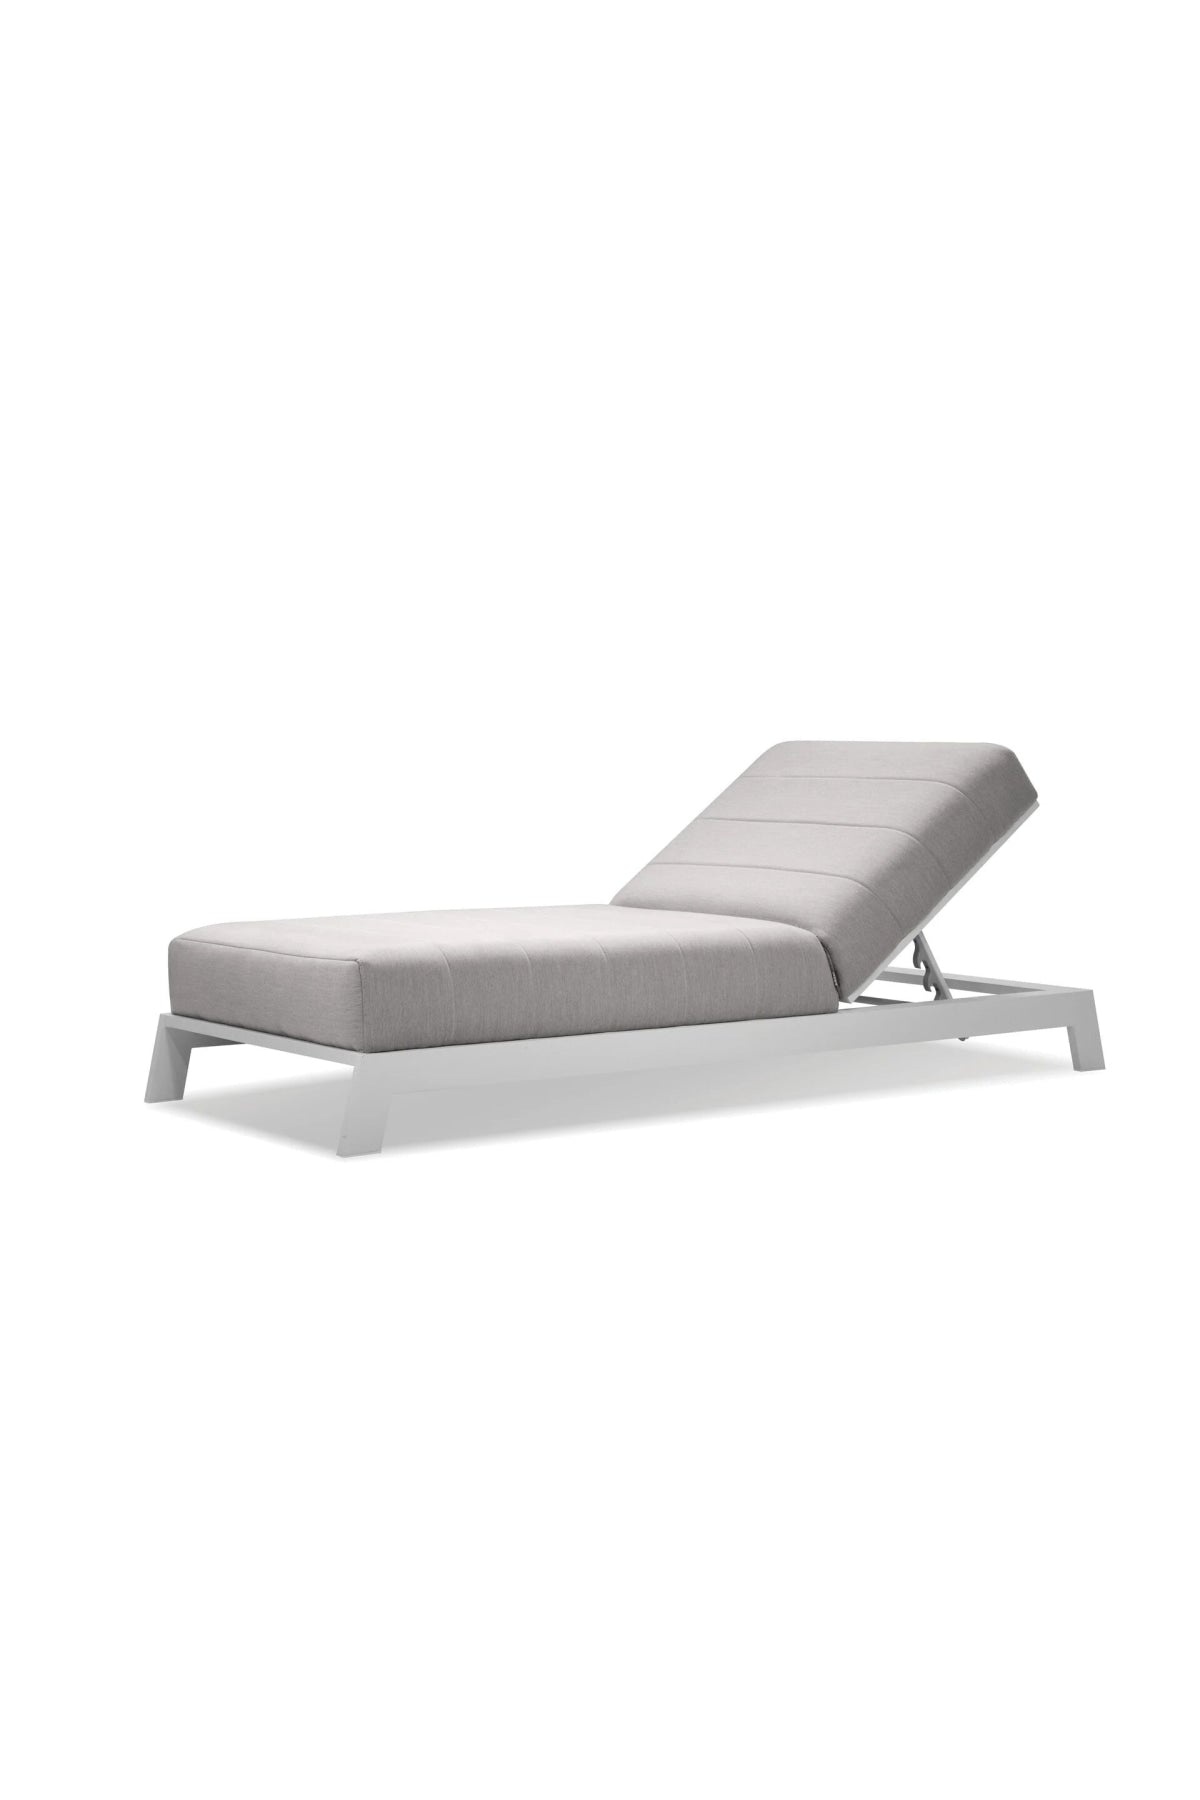 Oceana Outdoor Chaise Lounge